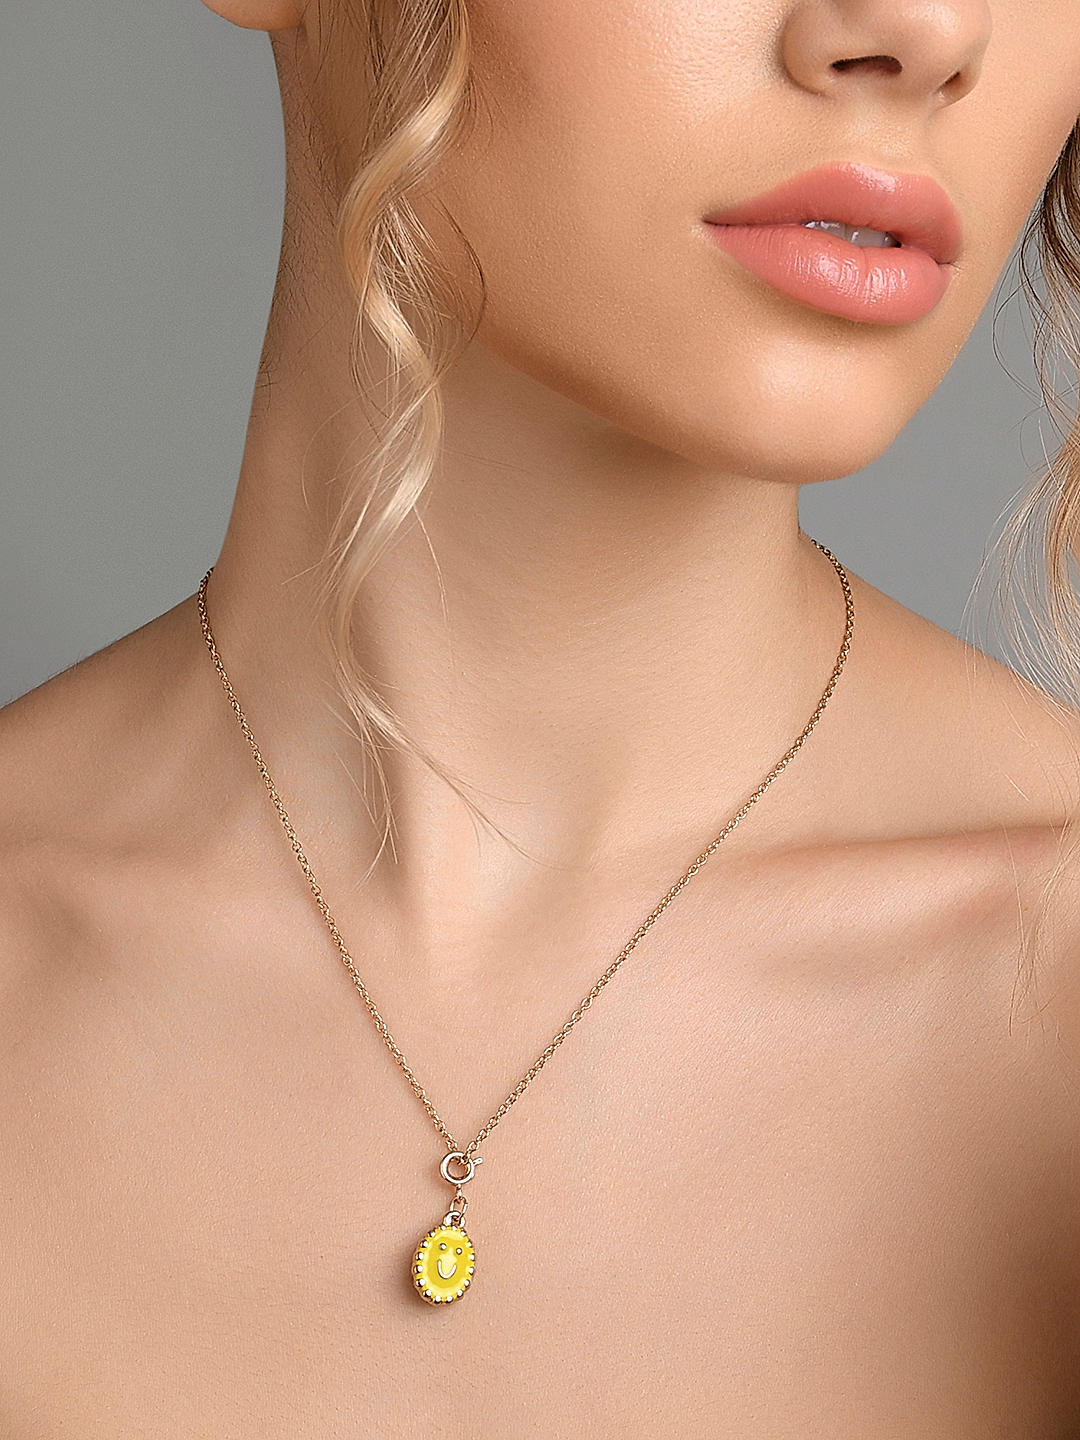 Holiday Gold Initial Locket Necklace | Ben-Amun Jewelry